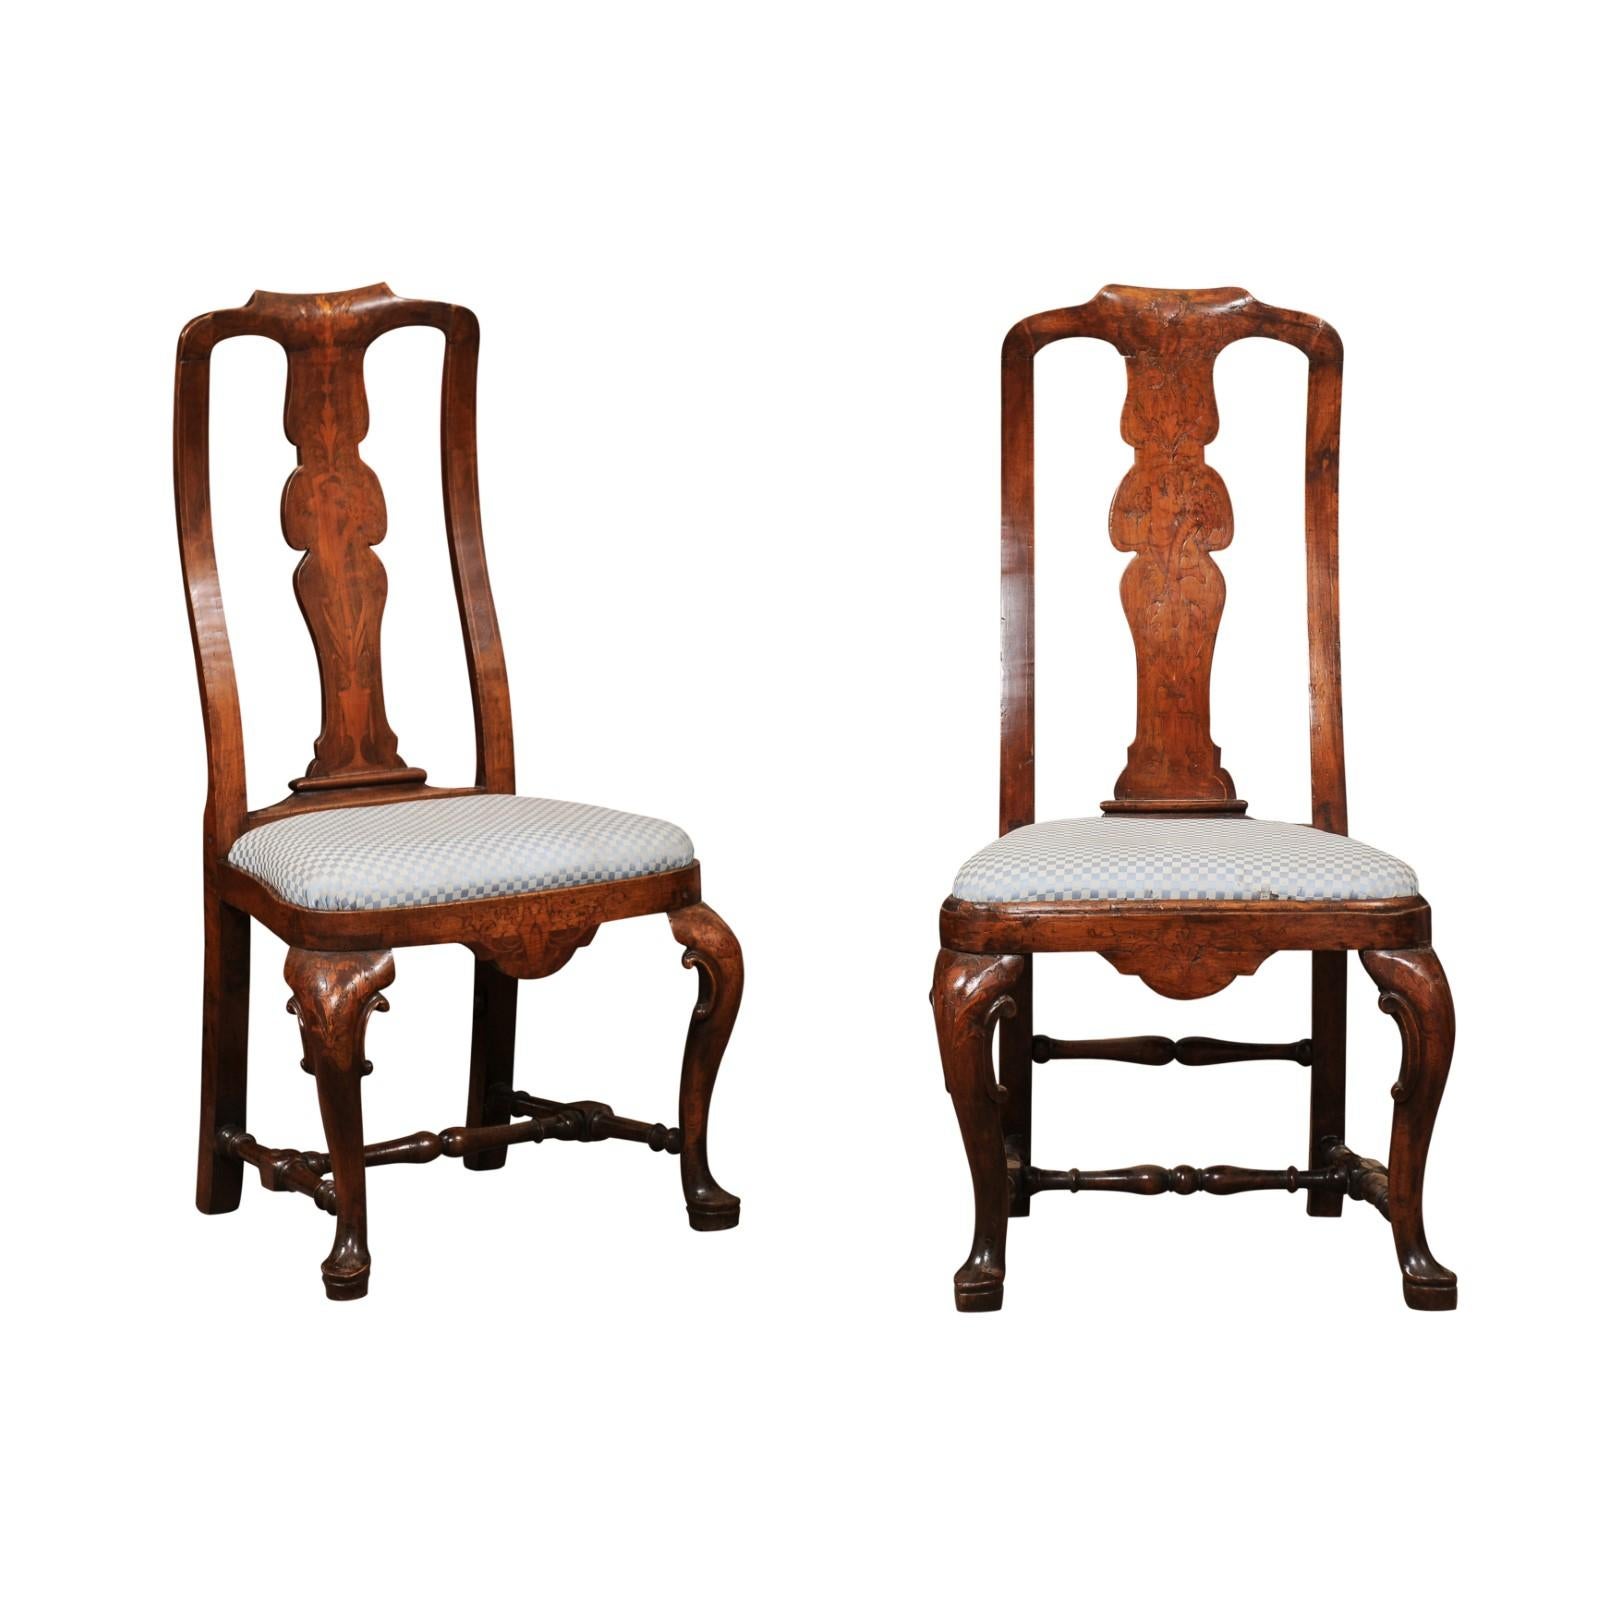 Pair of Dutch 18th Century Walnut Side Chairs with Marquetry Inlay & Pad Feet For Sale 6